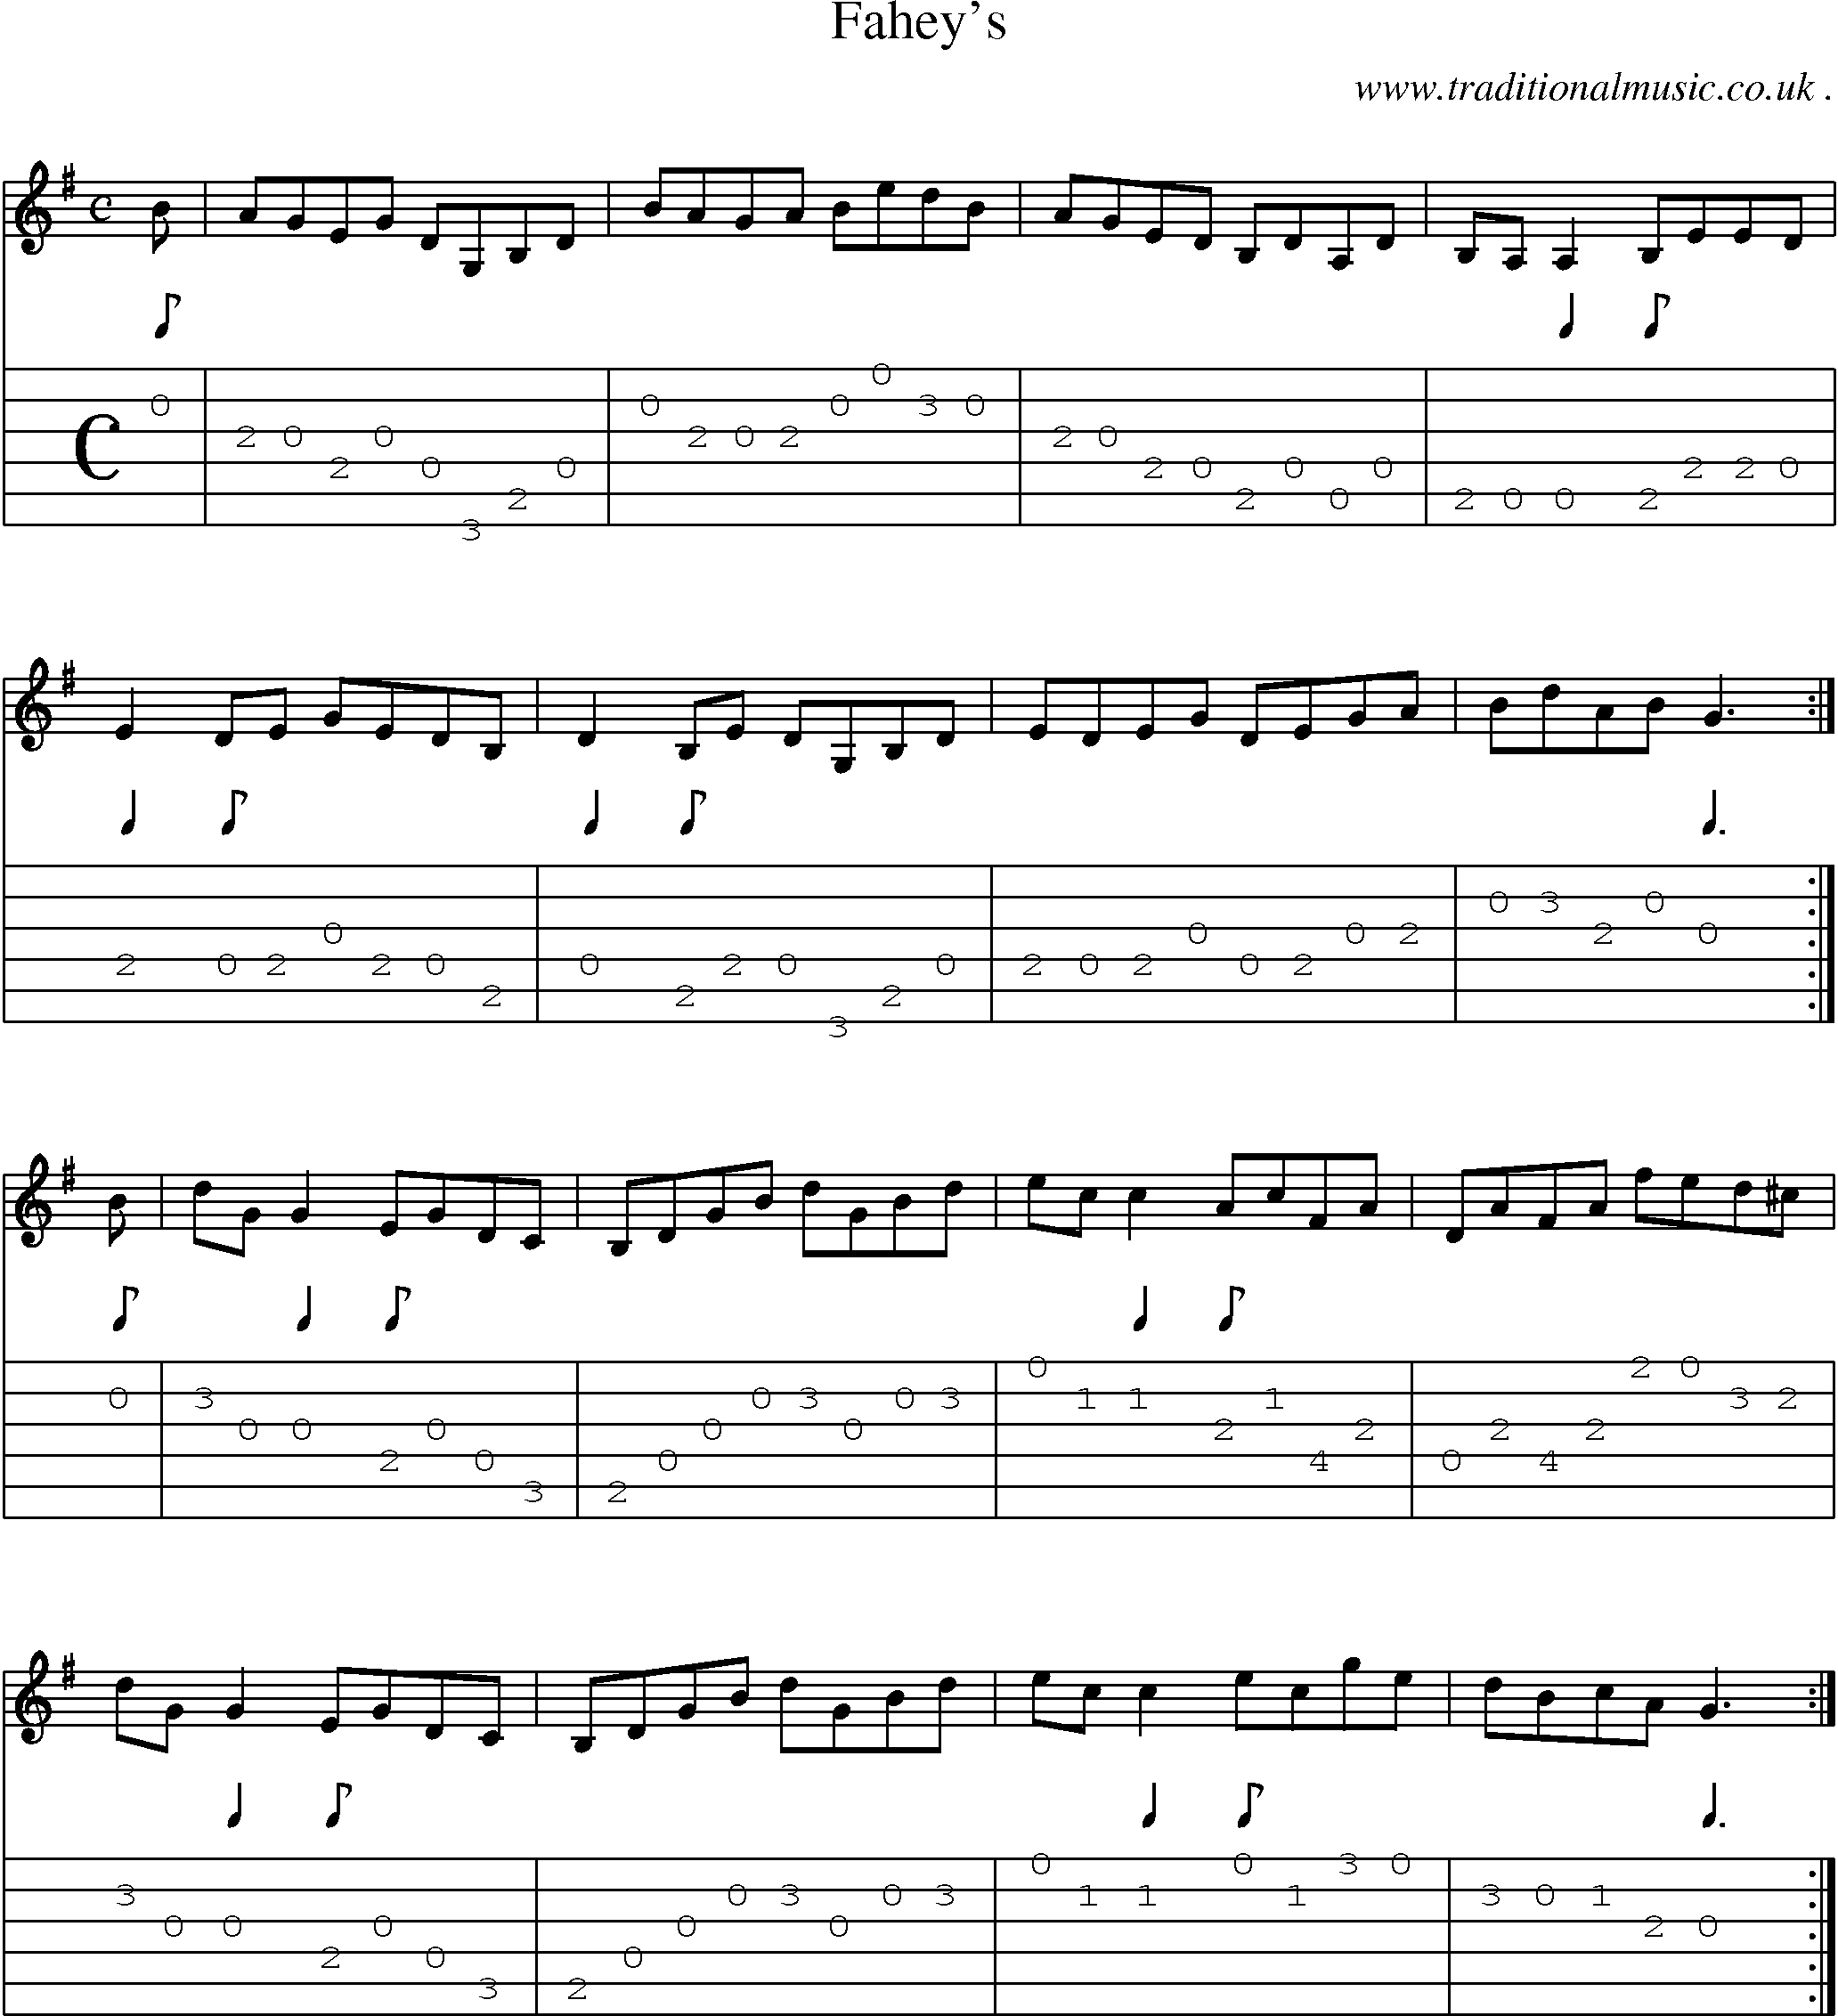 Sheet-Music and Guitar Tabs for Fahey